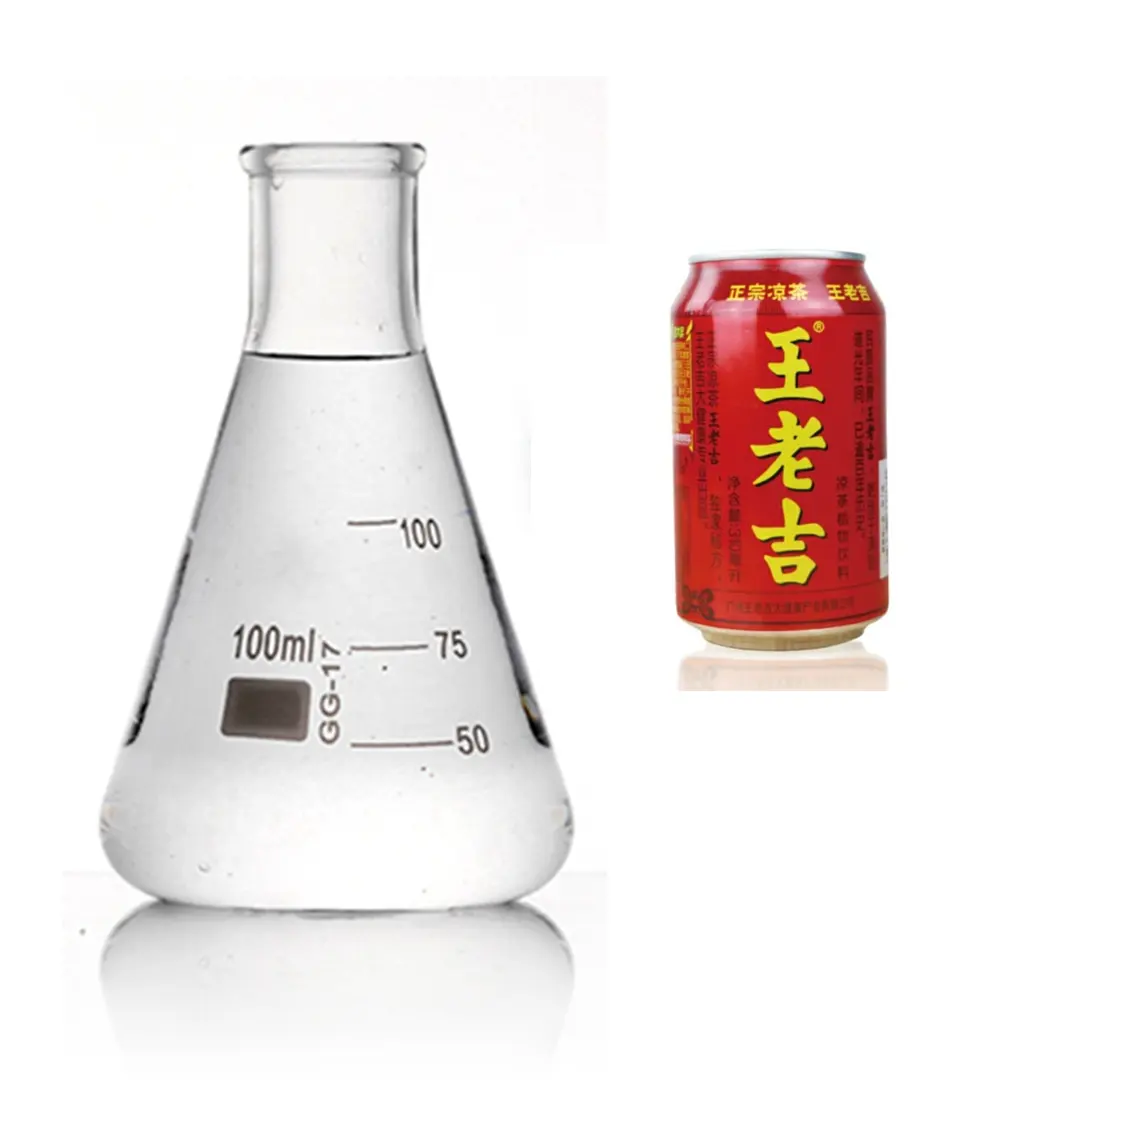 HUMANCHEM HG6600R02 exterior can coating lacquer for beverages